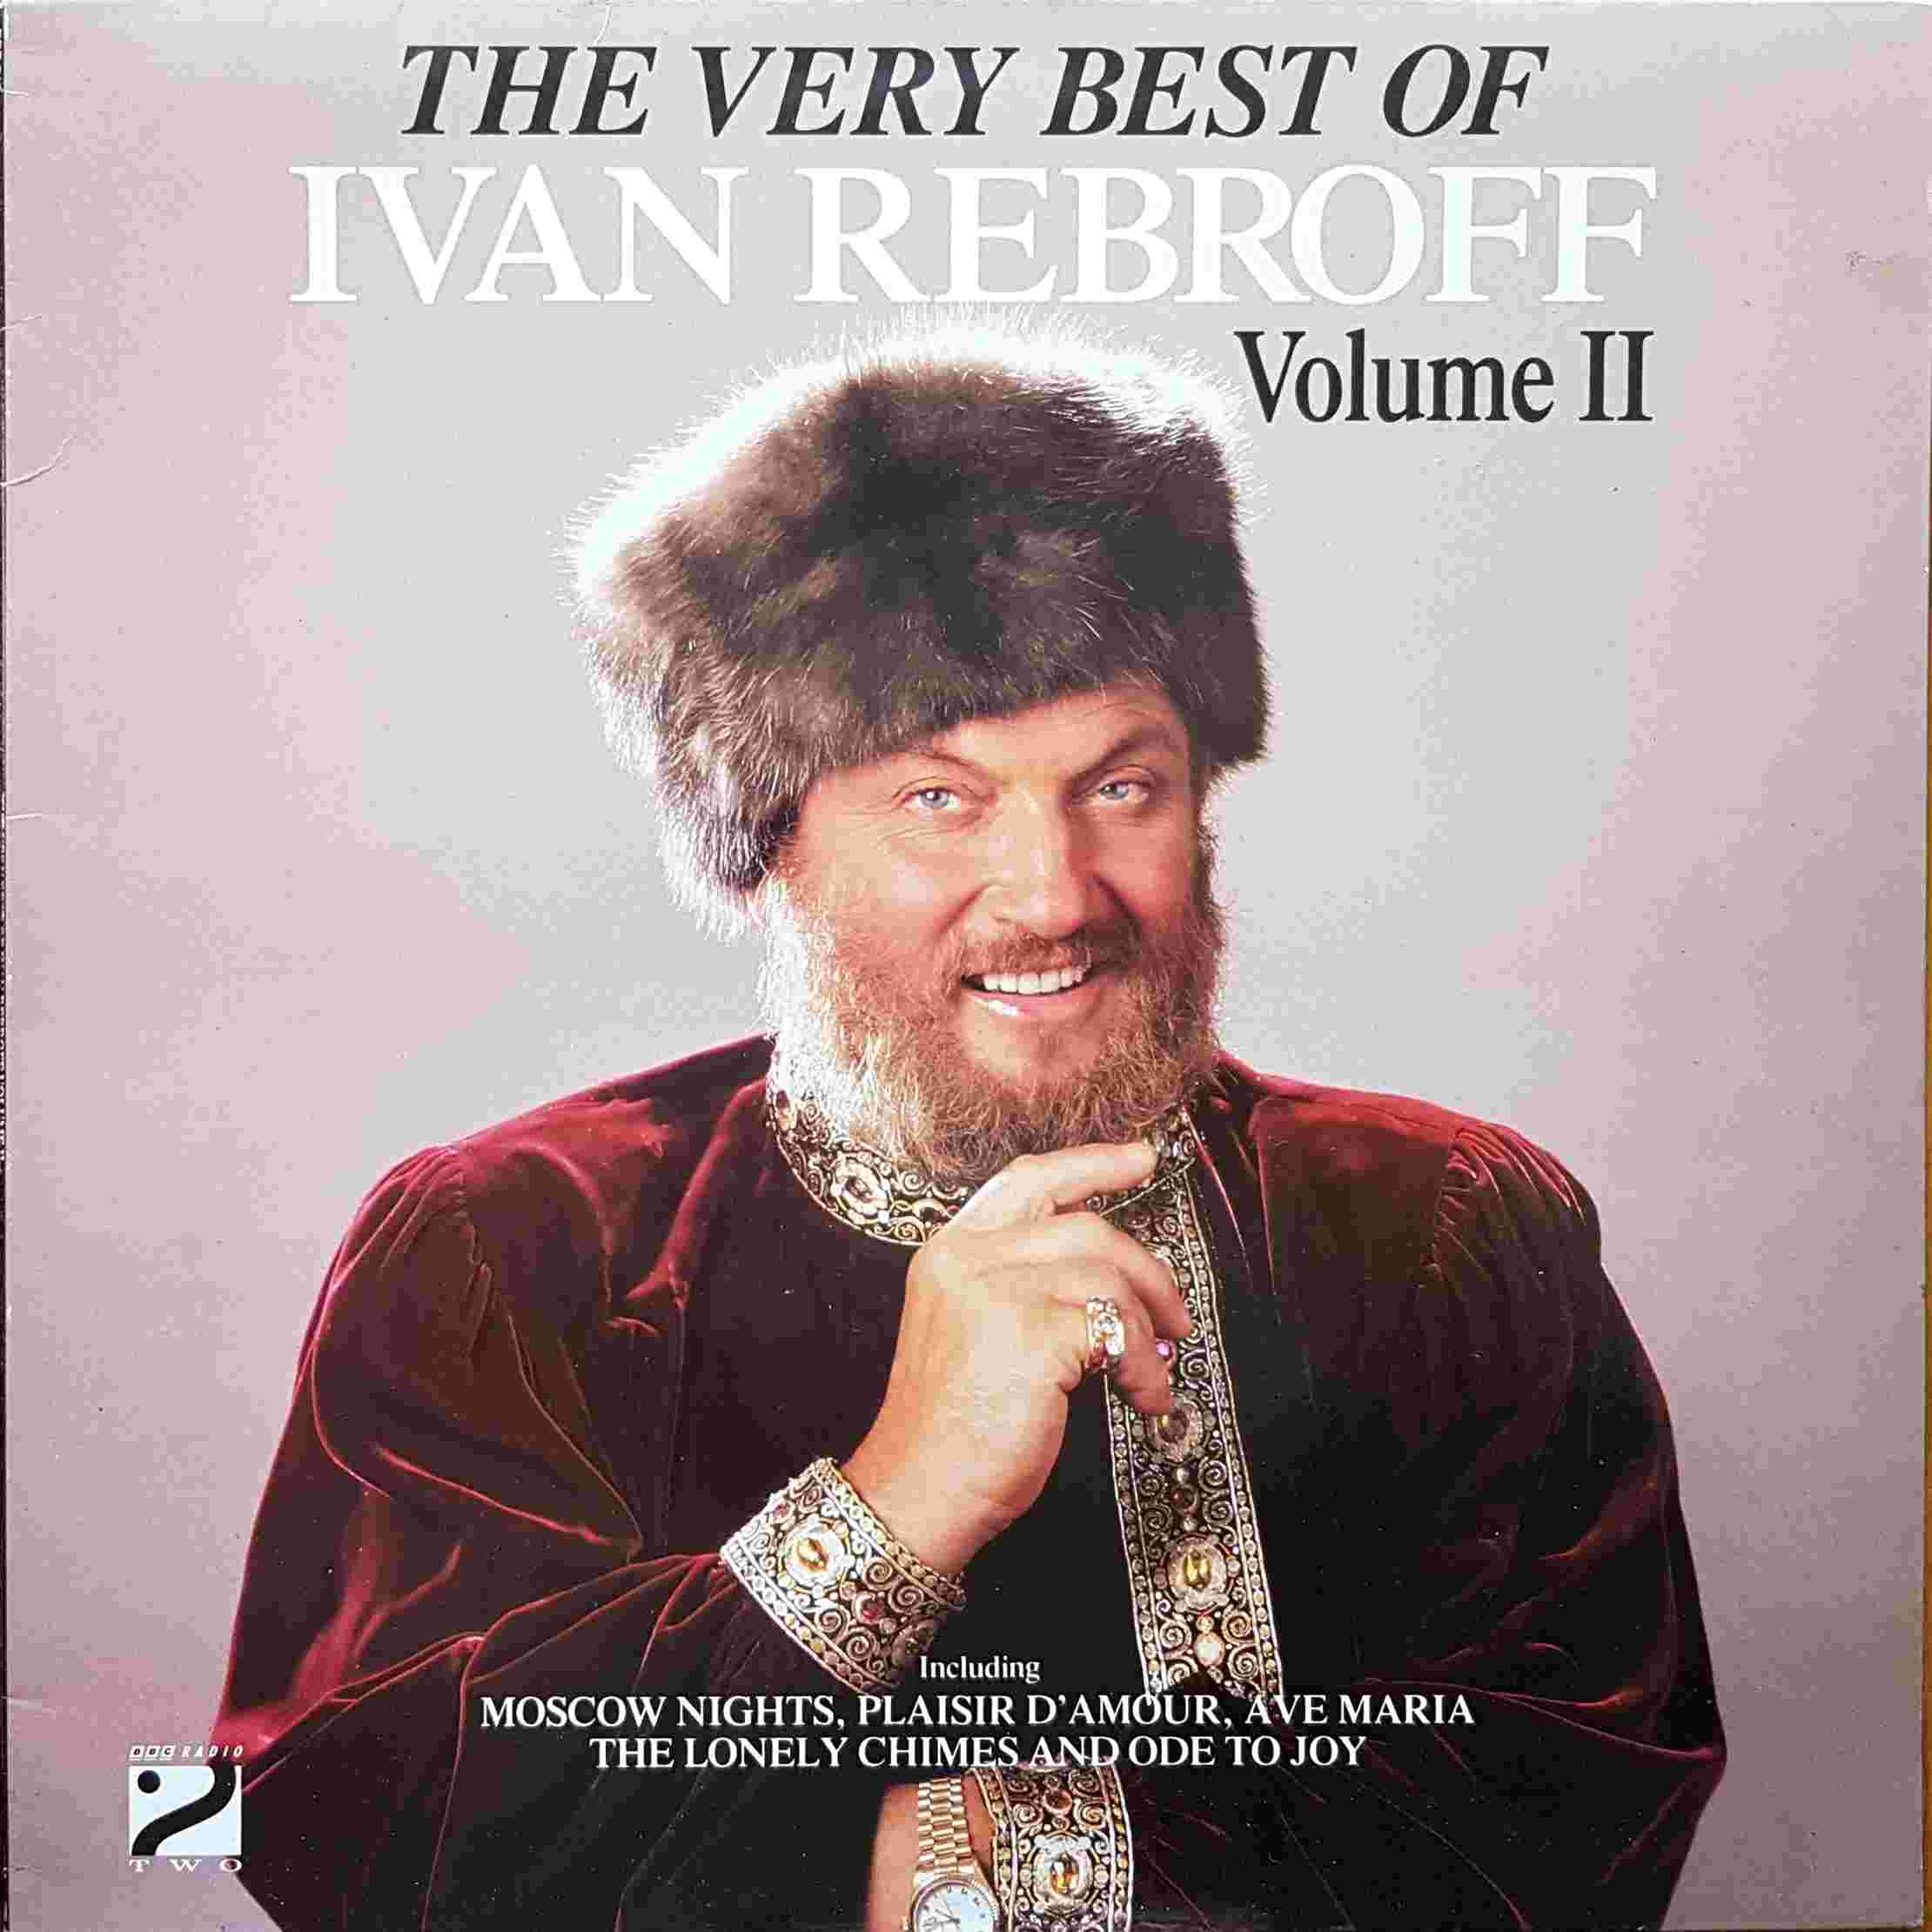 Picture of REB 848 The very best of Ivan Rebroff - Volume 2 by artist Ivan Rebroff from the BBC albums - Records and Tapes library